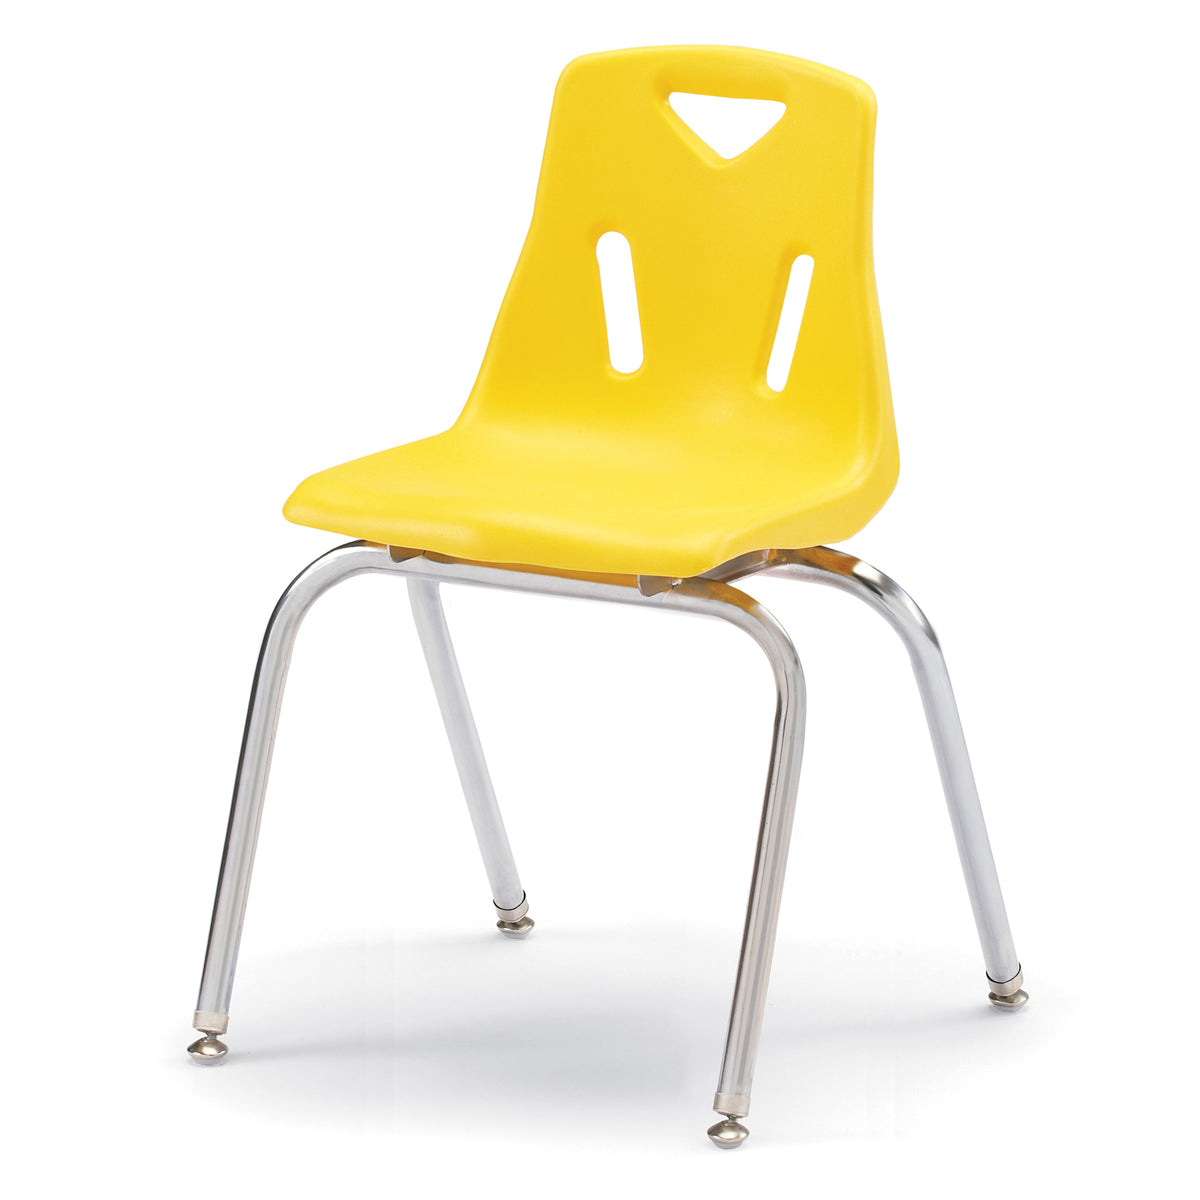 8148JC6007, Berries Stacking Chairs with Chrome-Plated Legs - 18" Ht - Set of 6 - Yellow